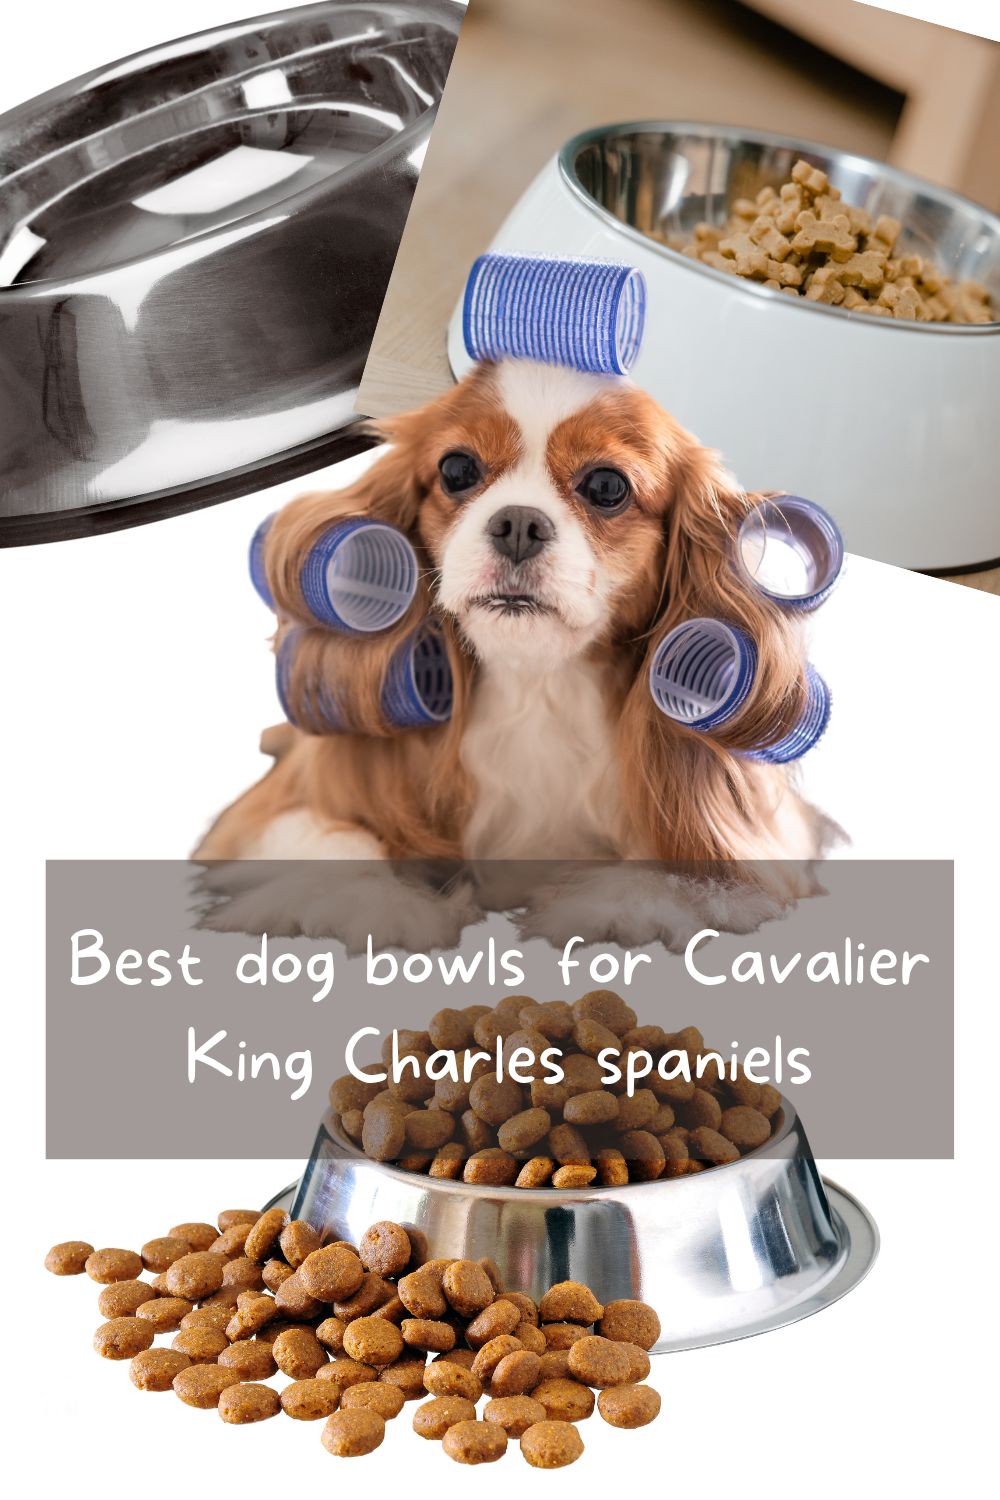 Great dog bowls for Cavalier King Charles spaniels